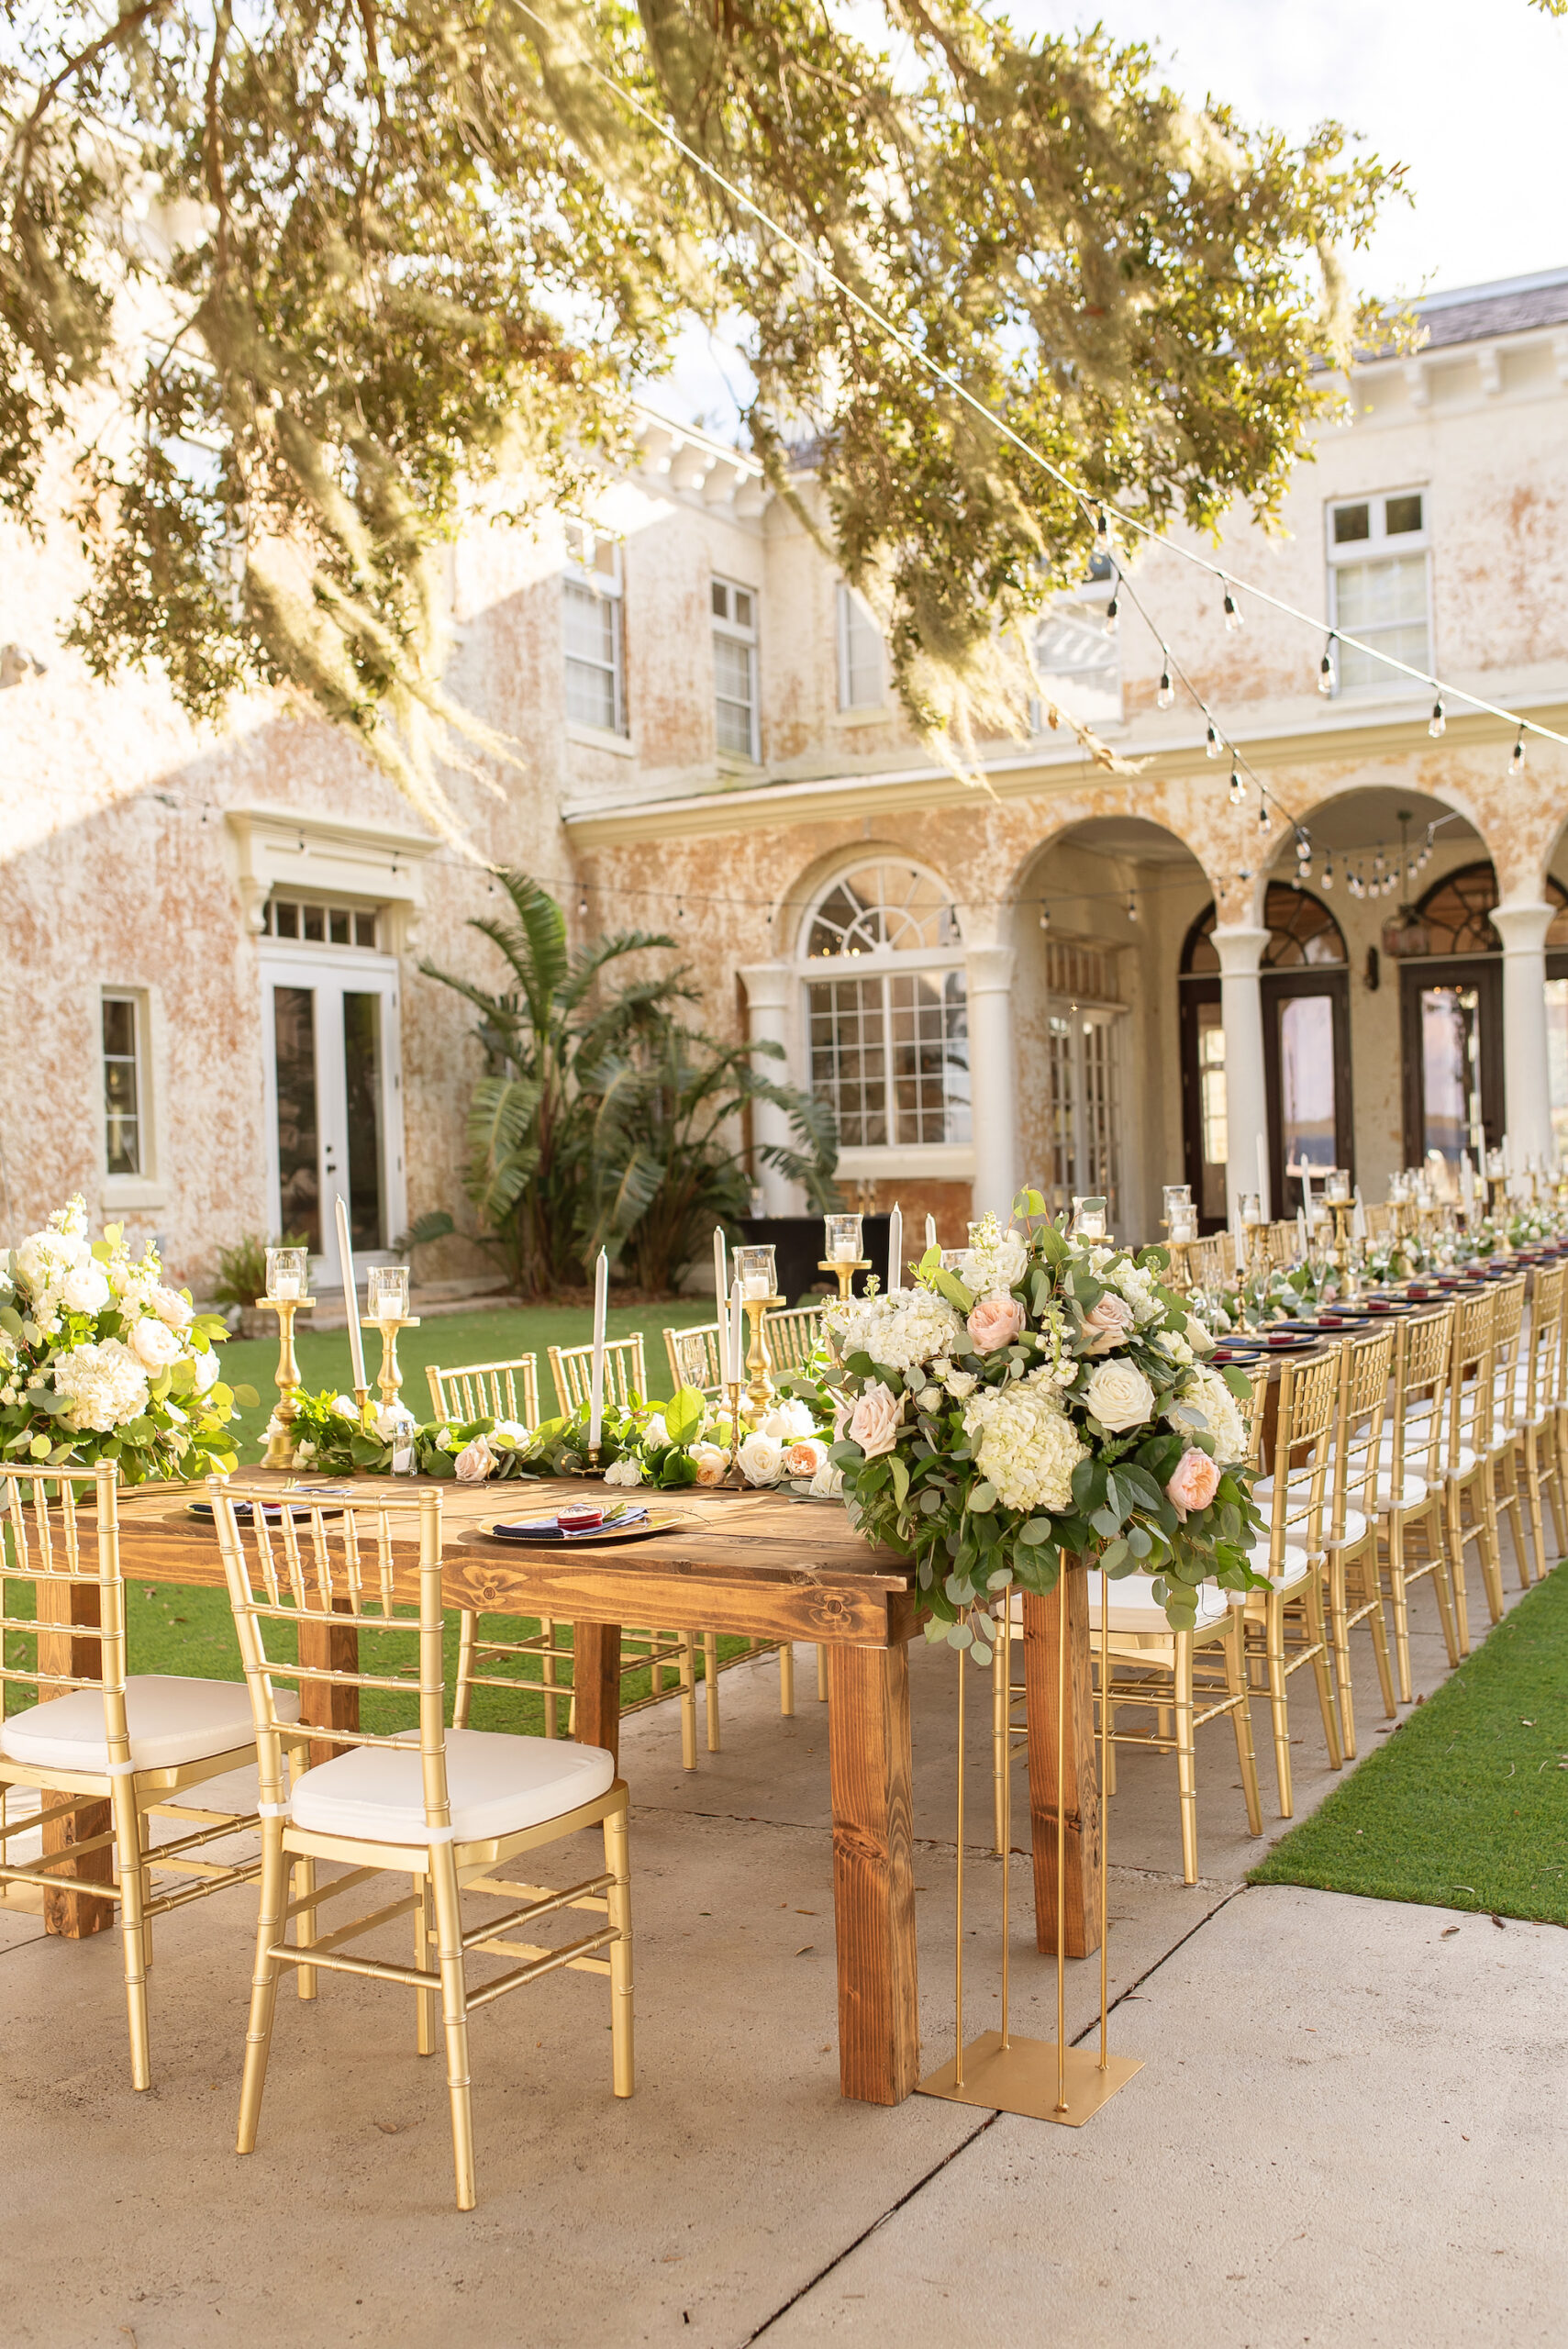 Italian-Inspired Wedding Decor Inspiration | Long Feasting Table for Intimate Wedding Reception | Gold Chiavari Chairs with Cushion | Cascading Rose and Eucalyptus Greenery Centerpiece Ideas | Tampa Bay Wedding Photographer Kristen Marie Photography | Central Florida Venue Bella Cosa